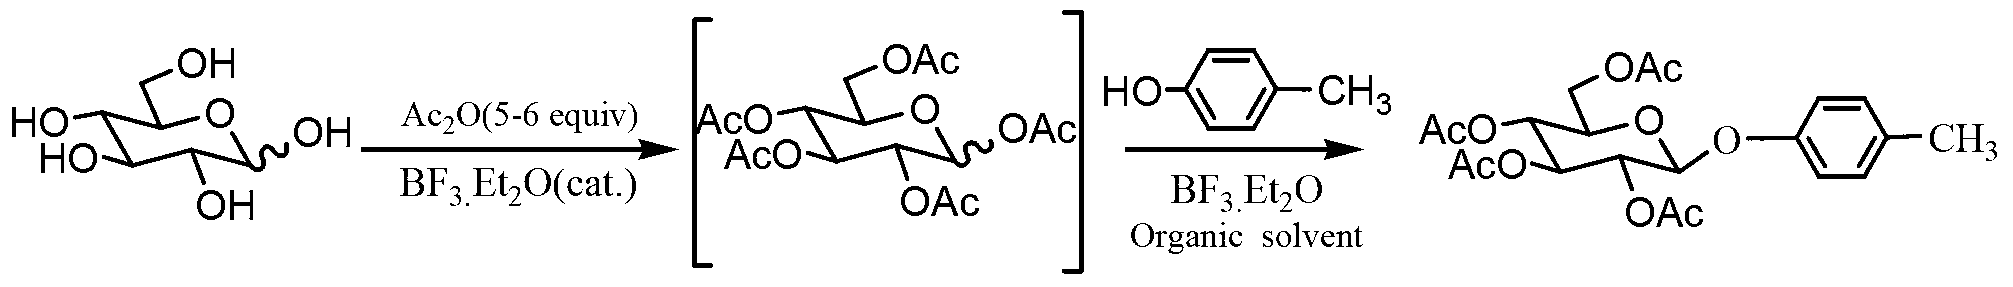 Gastrodin chemical synthesis method suitable for industrialization